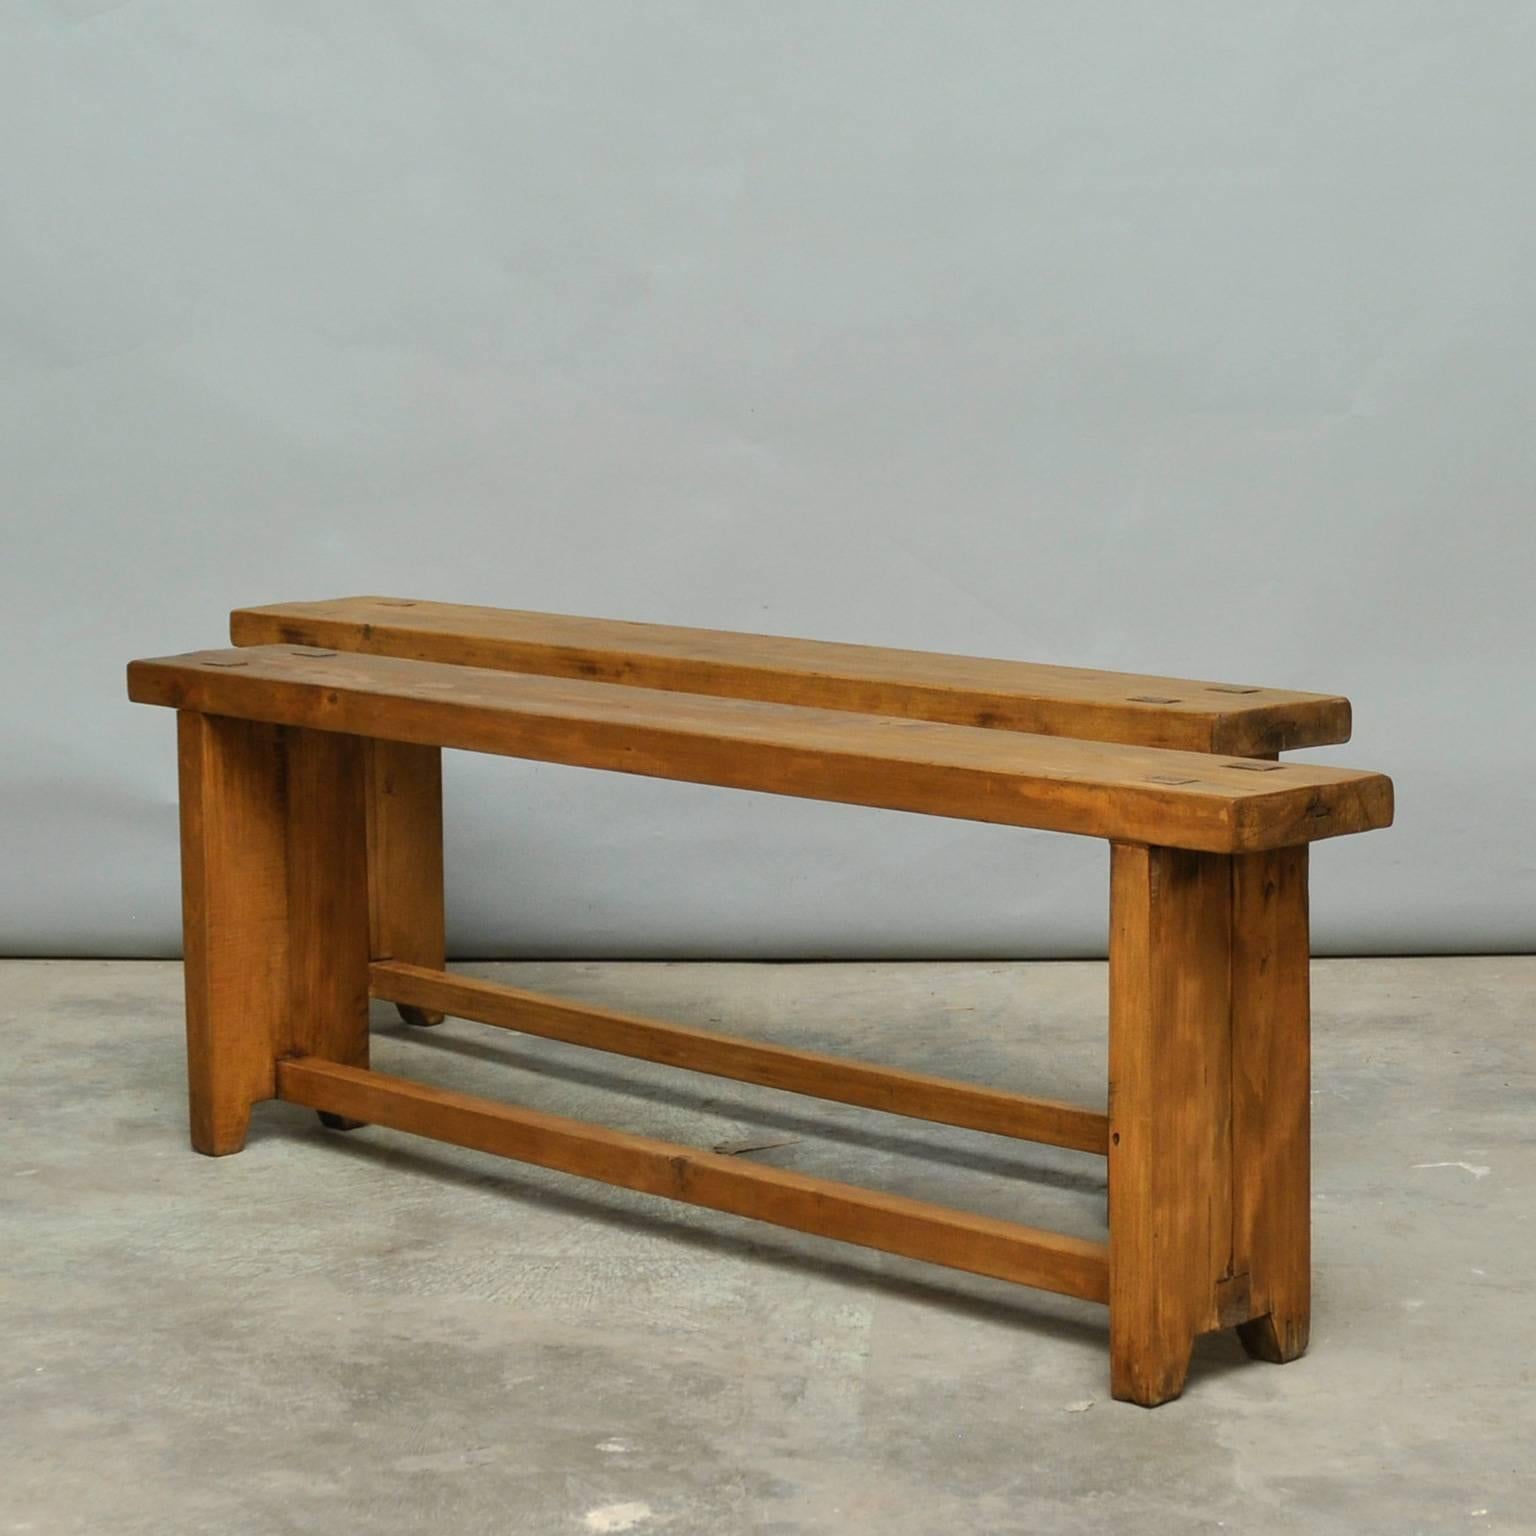 Small benches made of pine, circa 1930s.